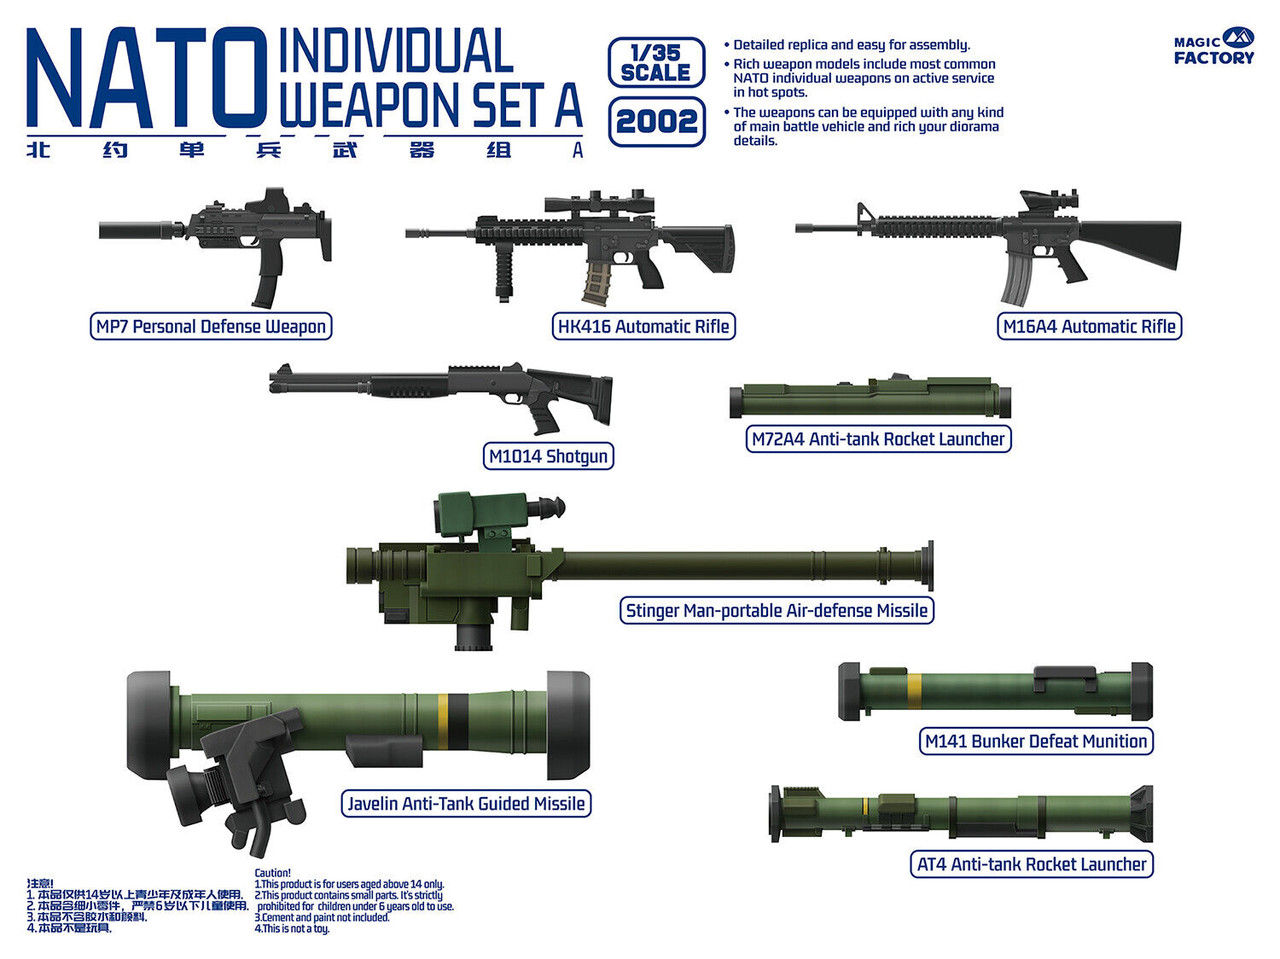 1/35 NATO Individual Weapons Set A